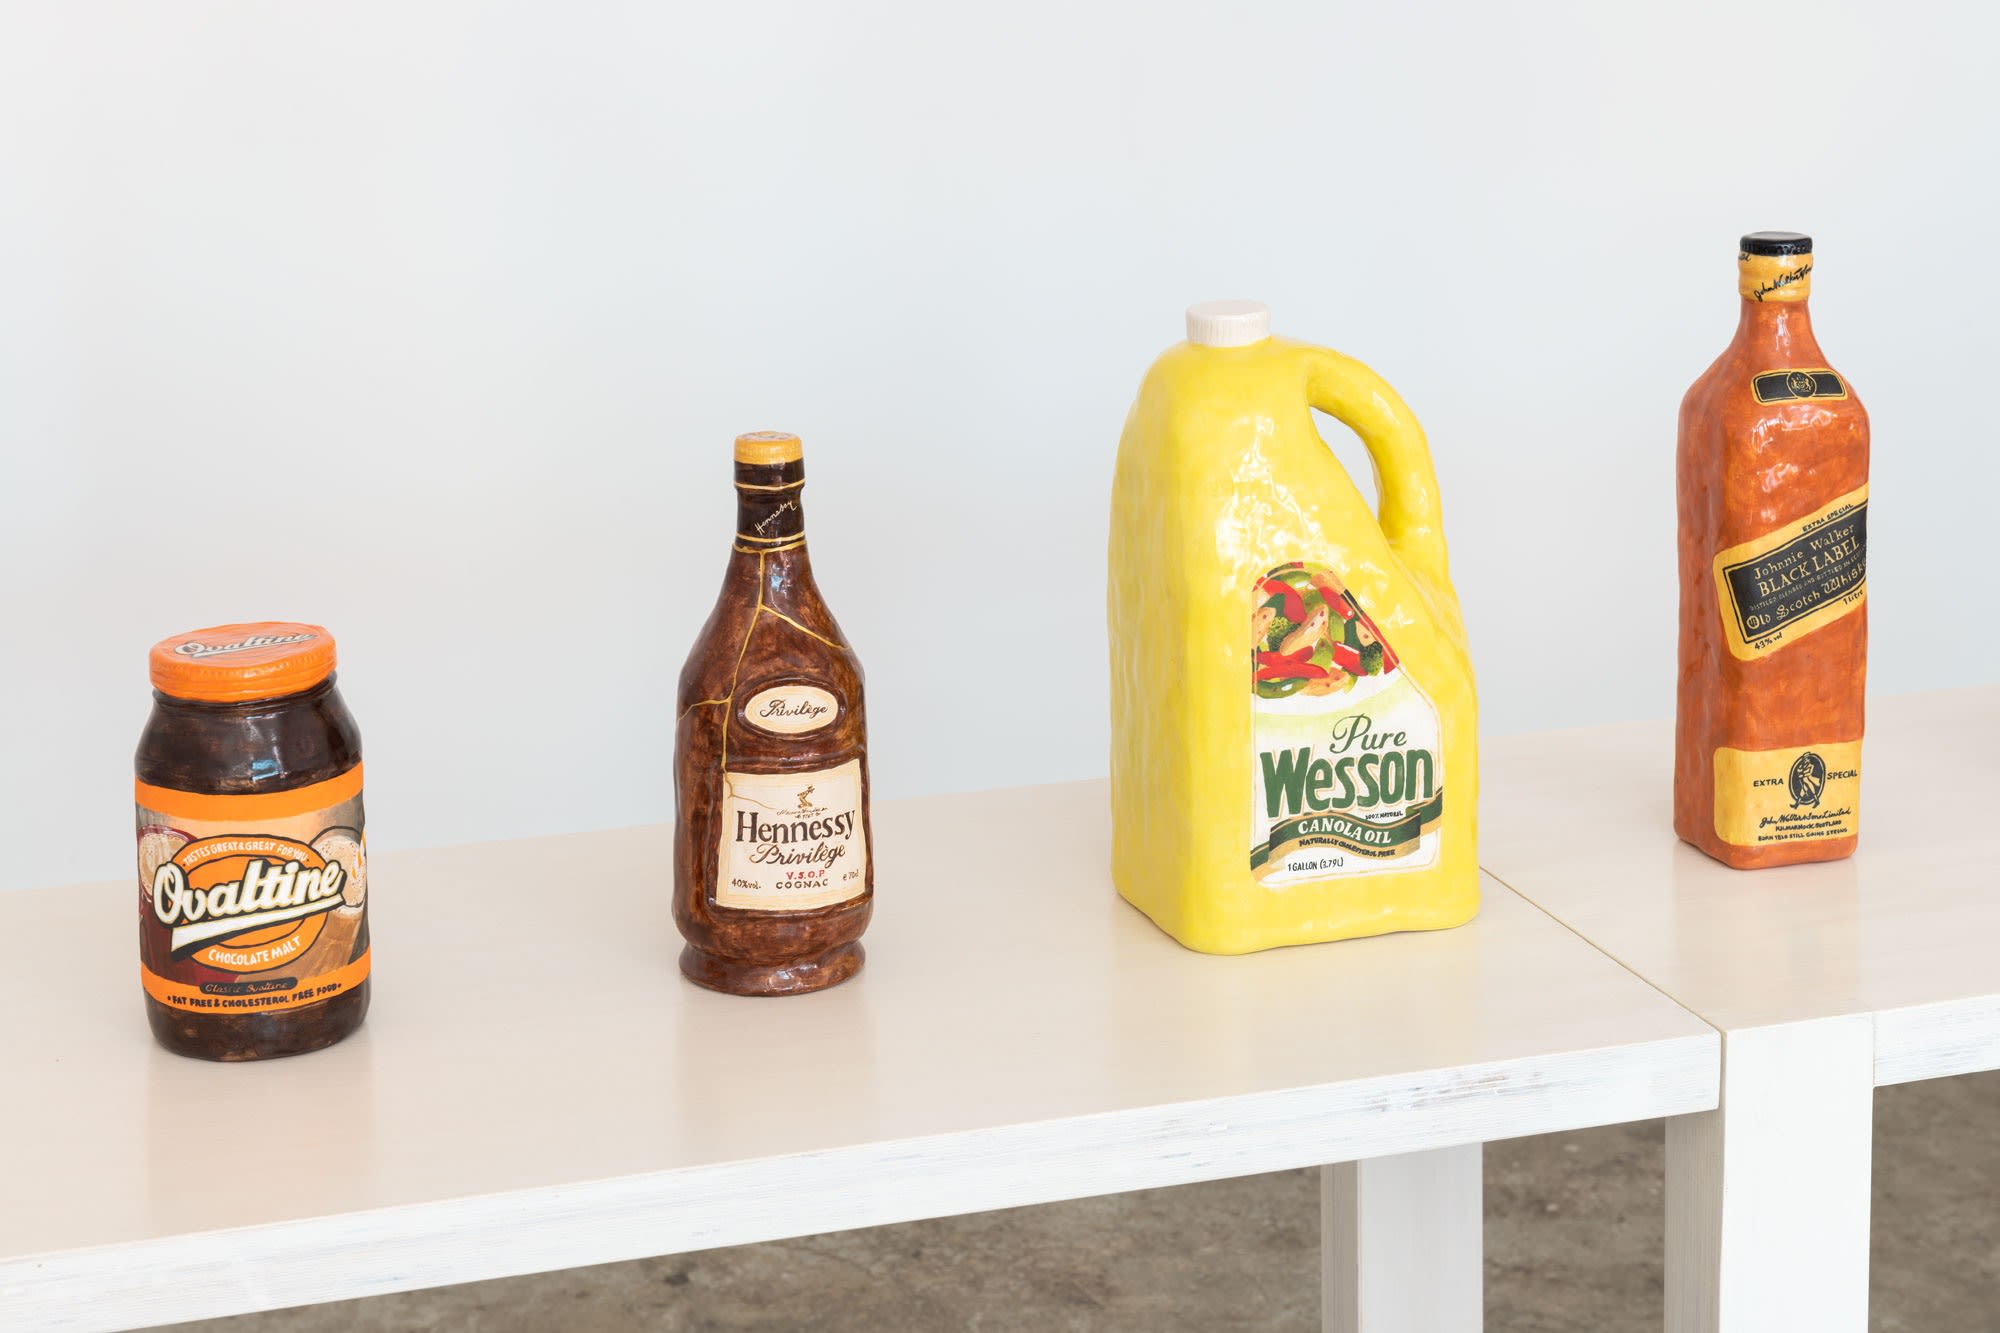 Six clay sculptures that look like grocery store products are arranged in a group. On the left, a can of condensed milk rests on top of a can of Spam. In the middle, a can of corned beef sits before a bottle of ketchup. On the right, a can of sweet corn is situated next to the ketchup bottle, while a package of Vienna sausages leans against the corned beef.